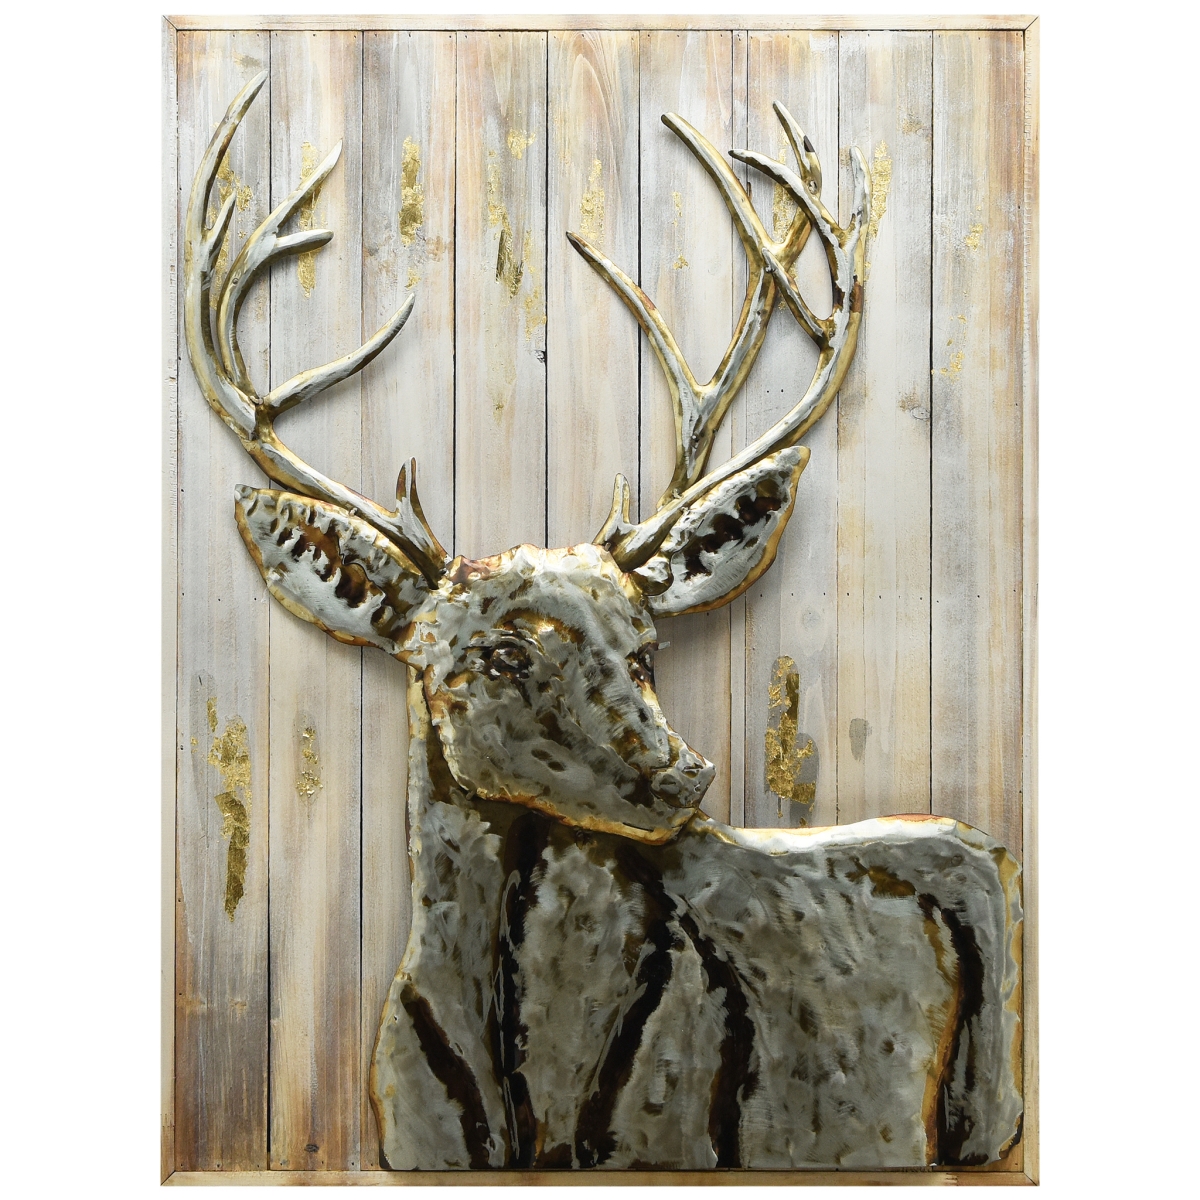 Solid Storage Supplies 40 x 30 in. Deer 1 Hand Painted Primo Mixed Media Iron Wall Sculpture on Slatted Solid Wood 3D Metal Wall Art